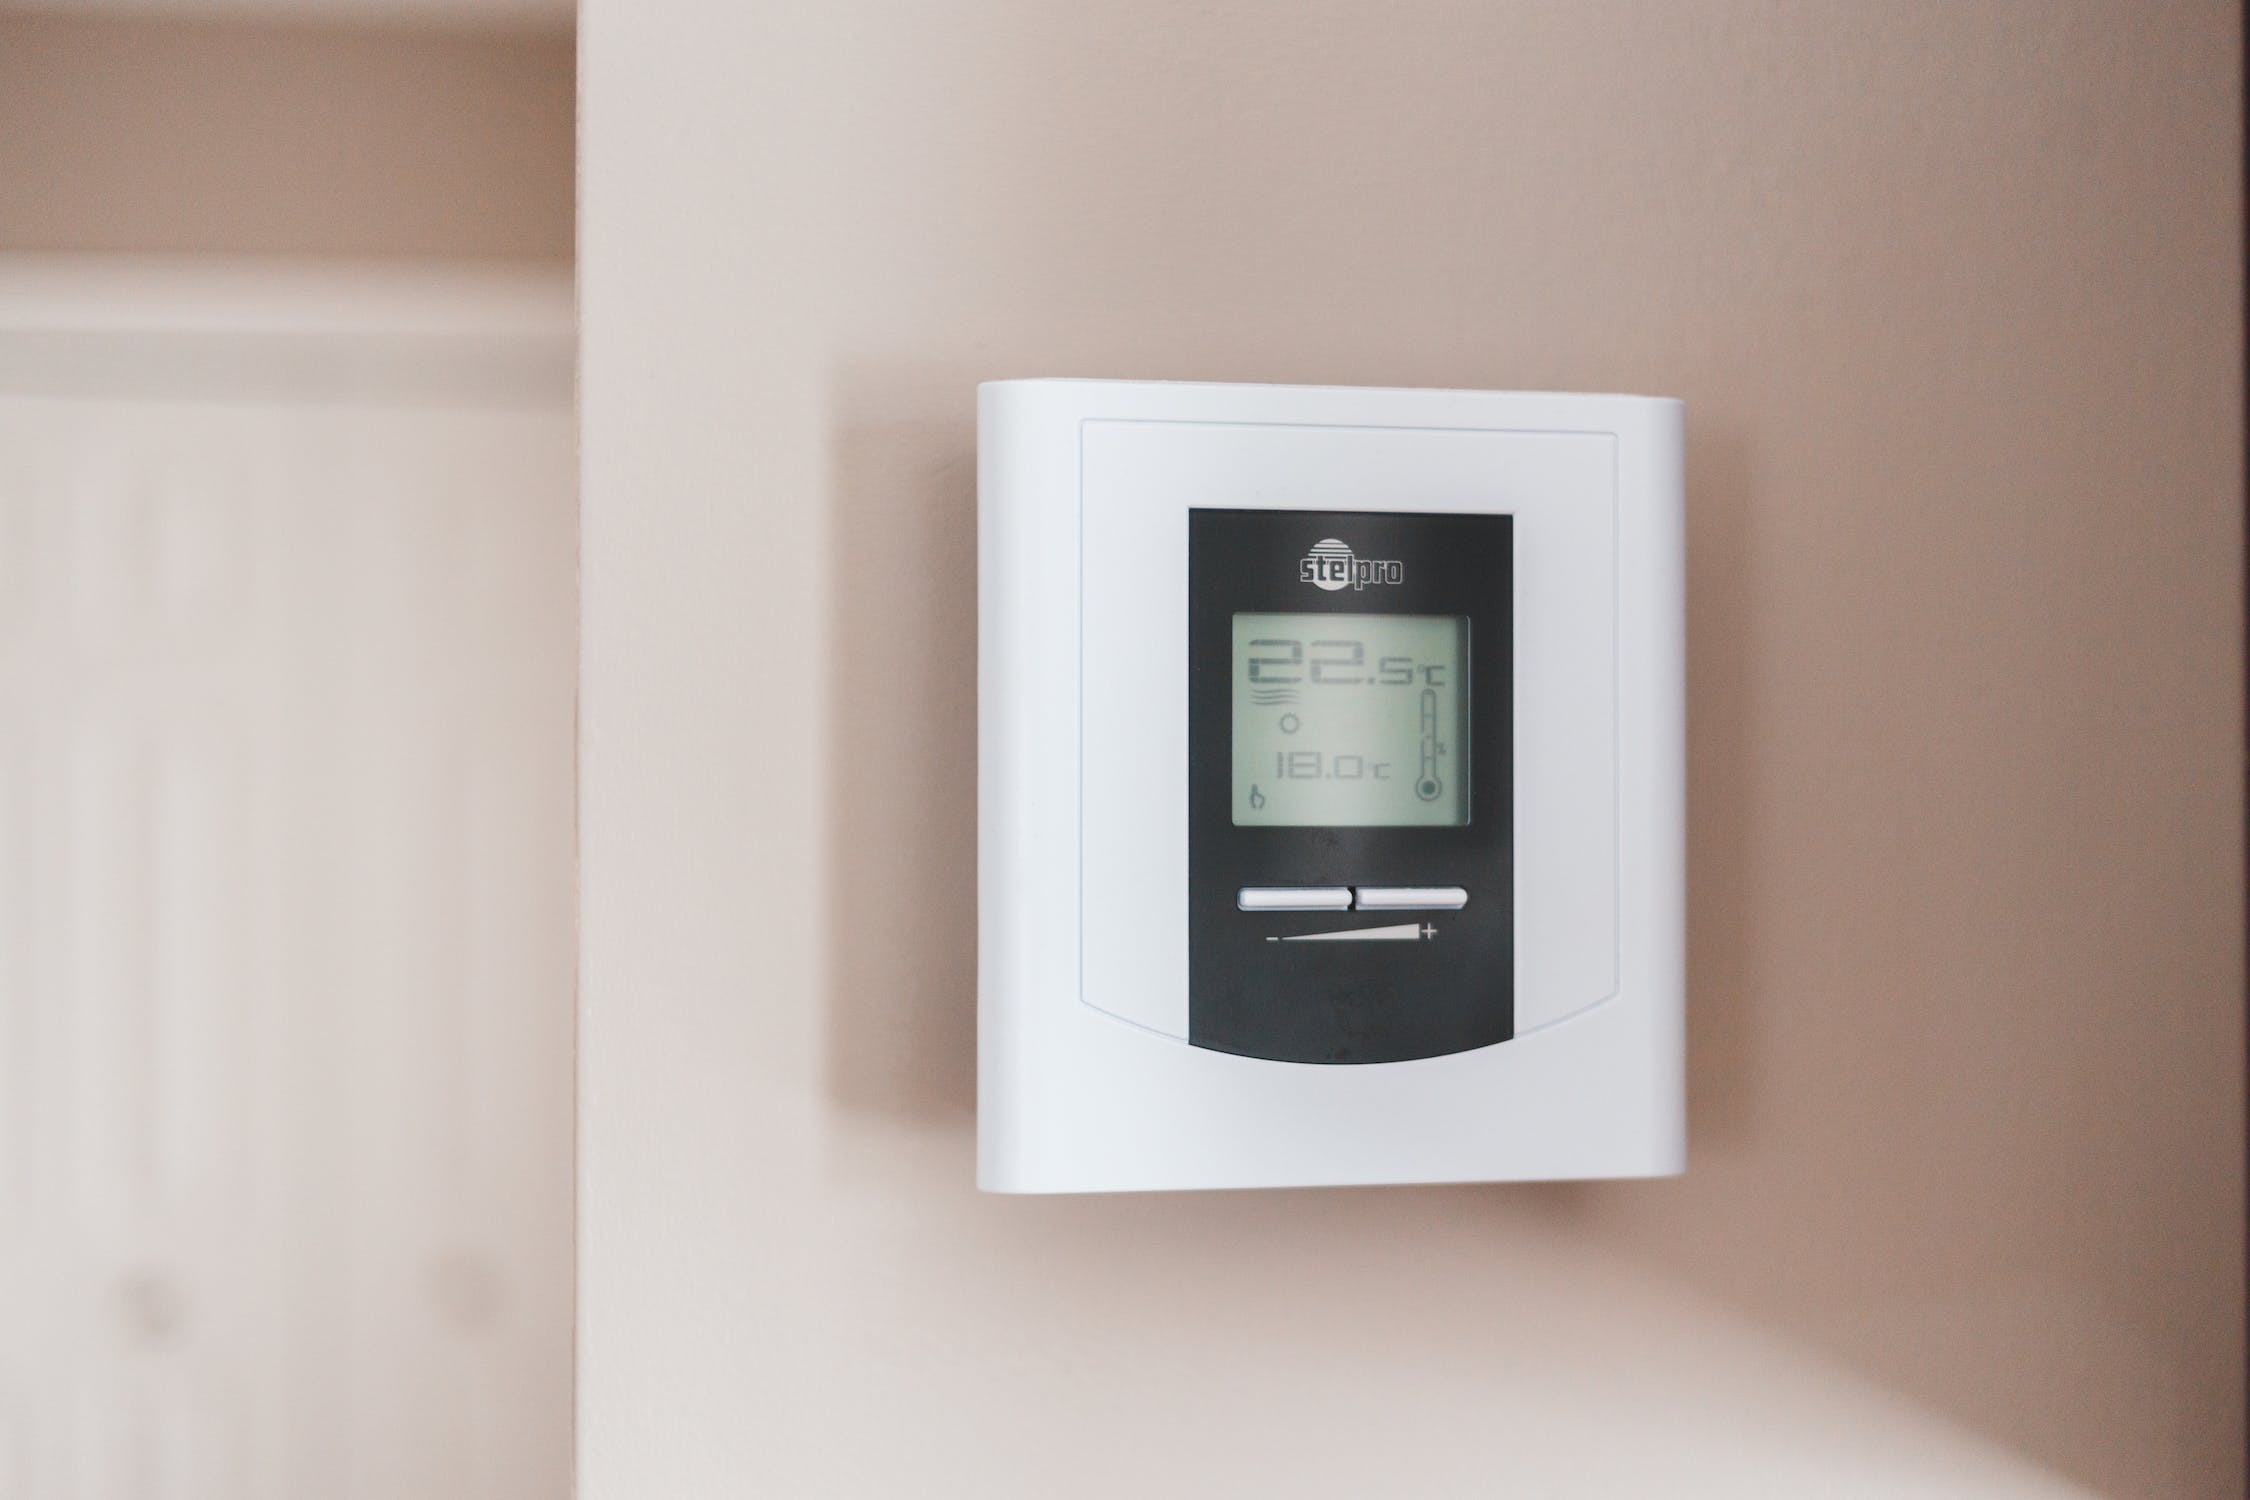 How to Tell If Your HVAC Thermostat Needs to Be Replaced